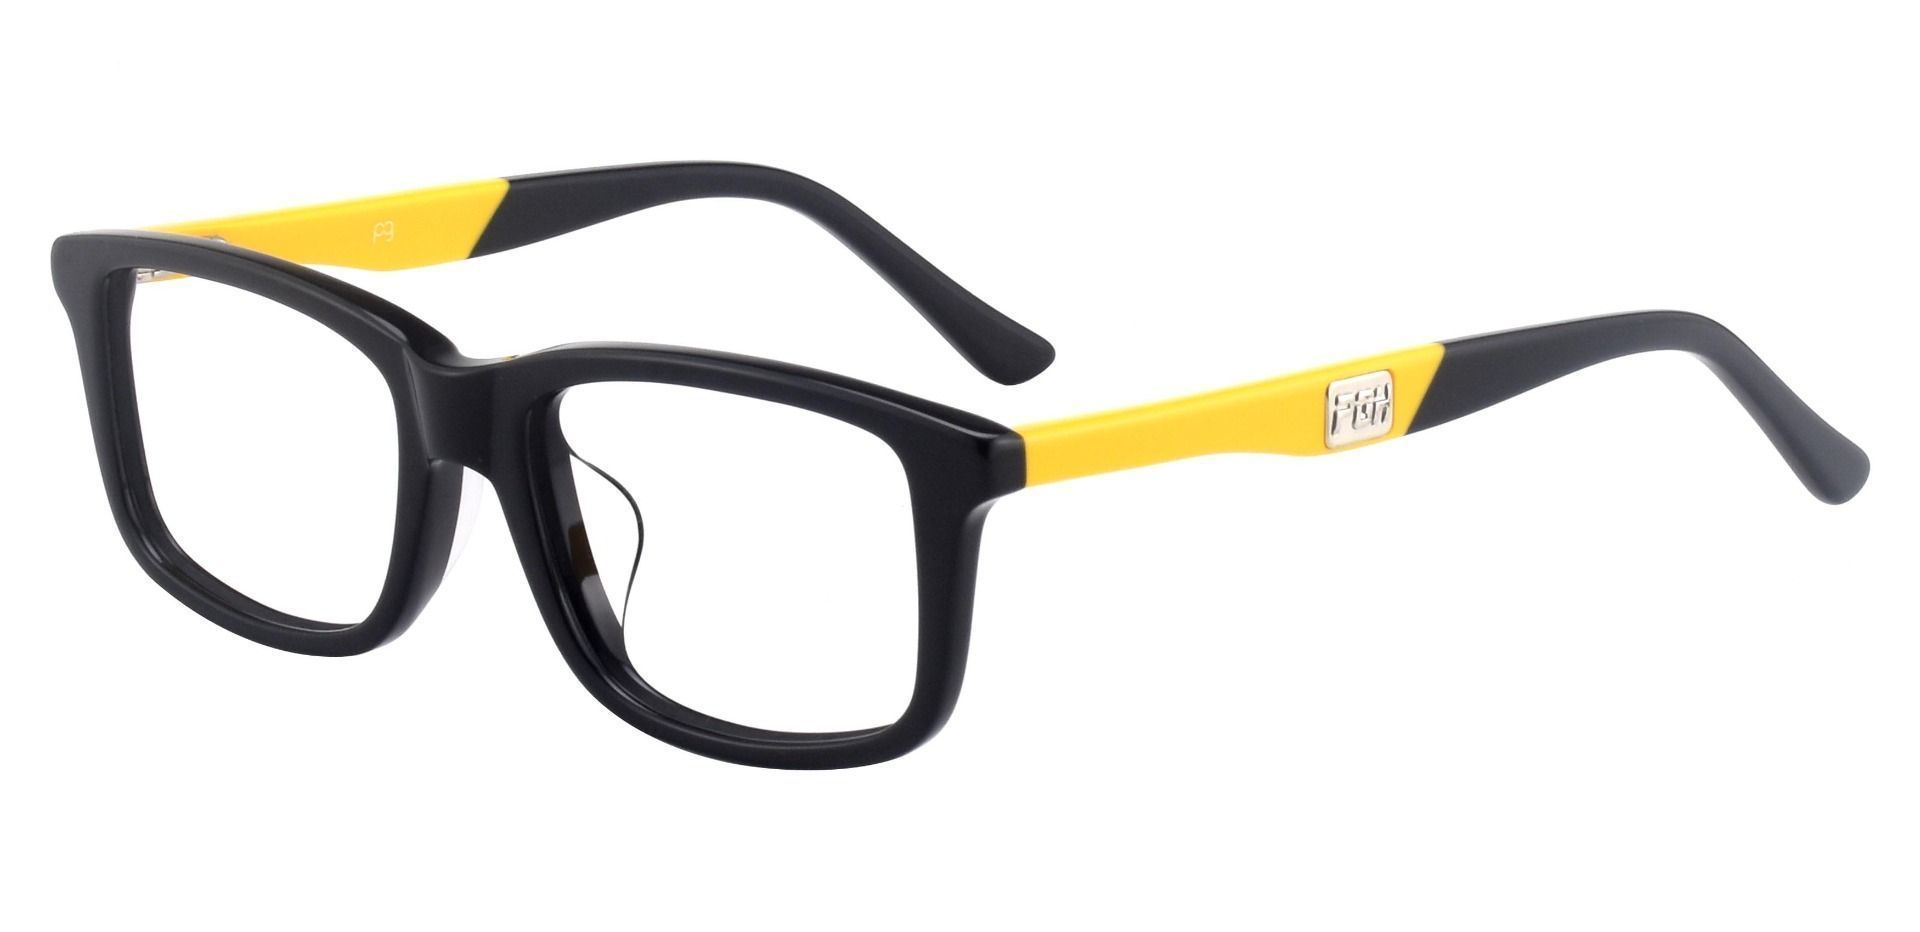 Allegheny Rectangle Lined Bifocal Glasses - Black-yellow